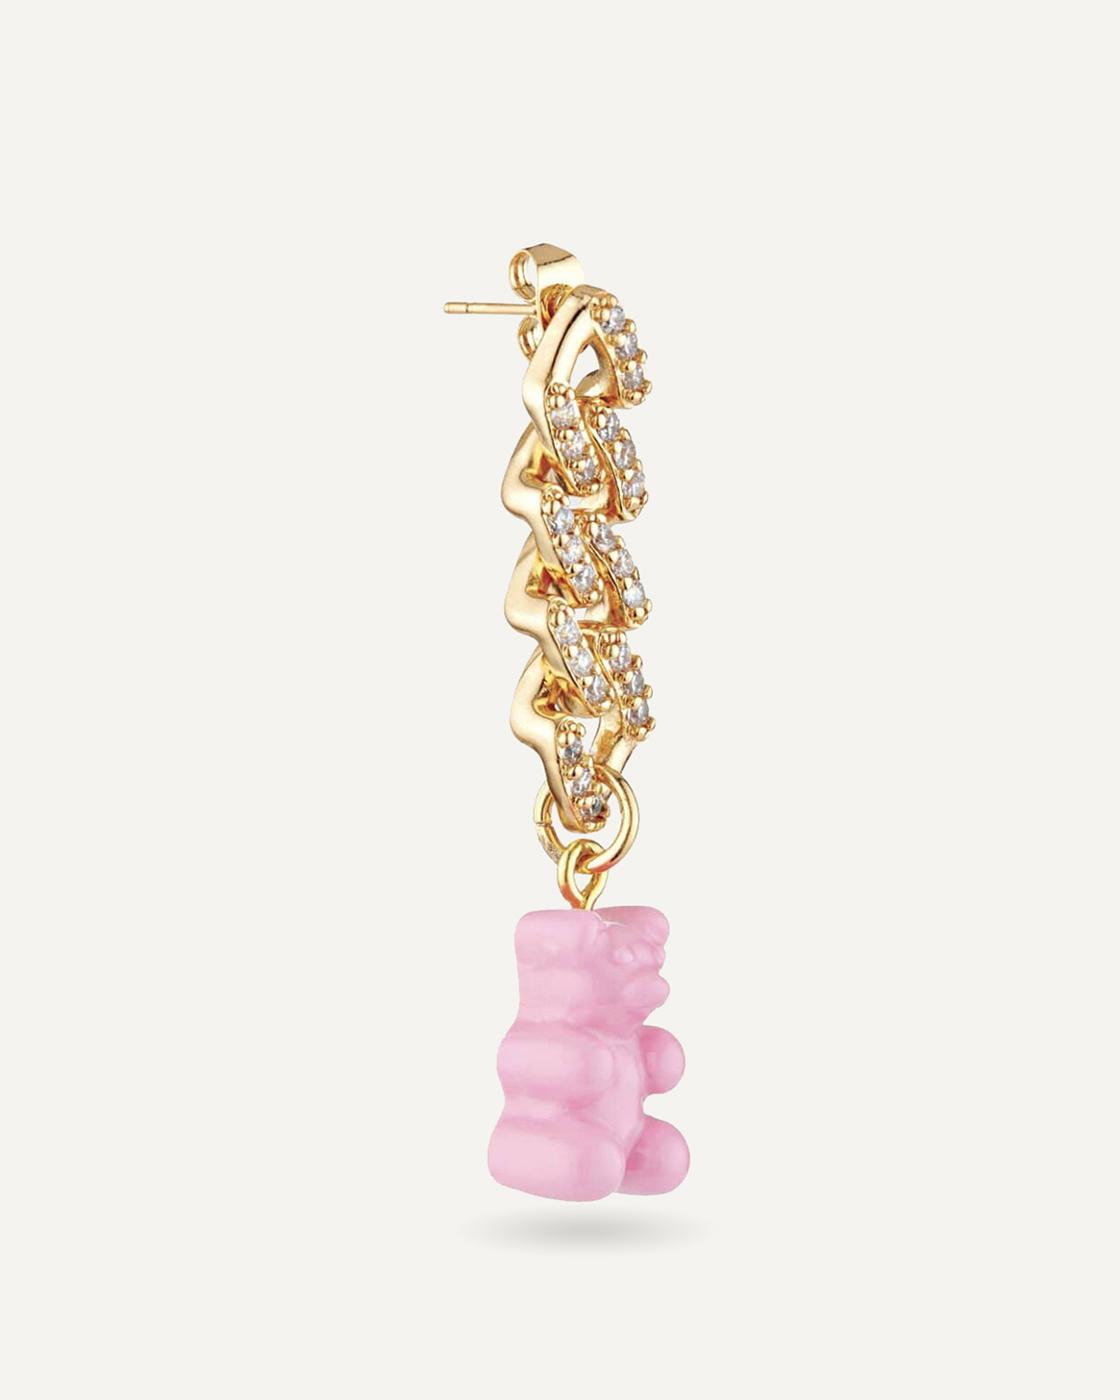 Nostalgia Bear Gold-Plated, Resin and Cubic Zirconia Single Hoop Earring - Candy pink